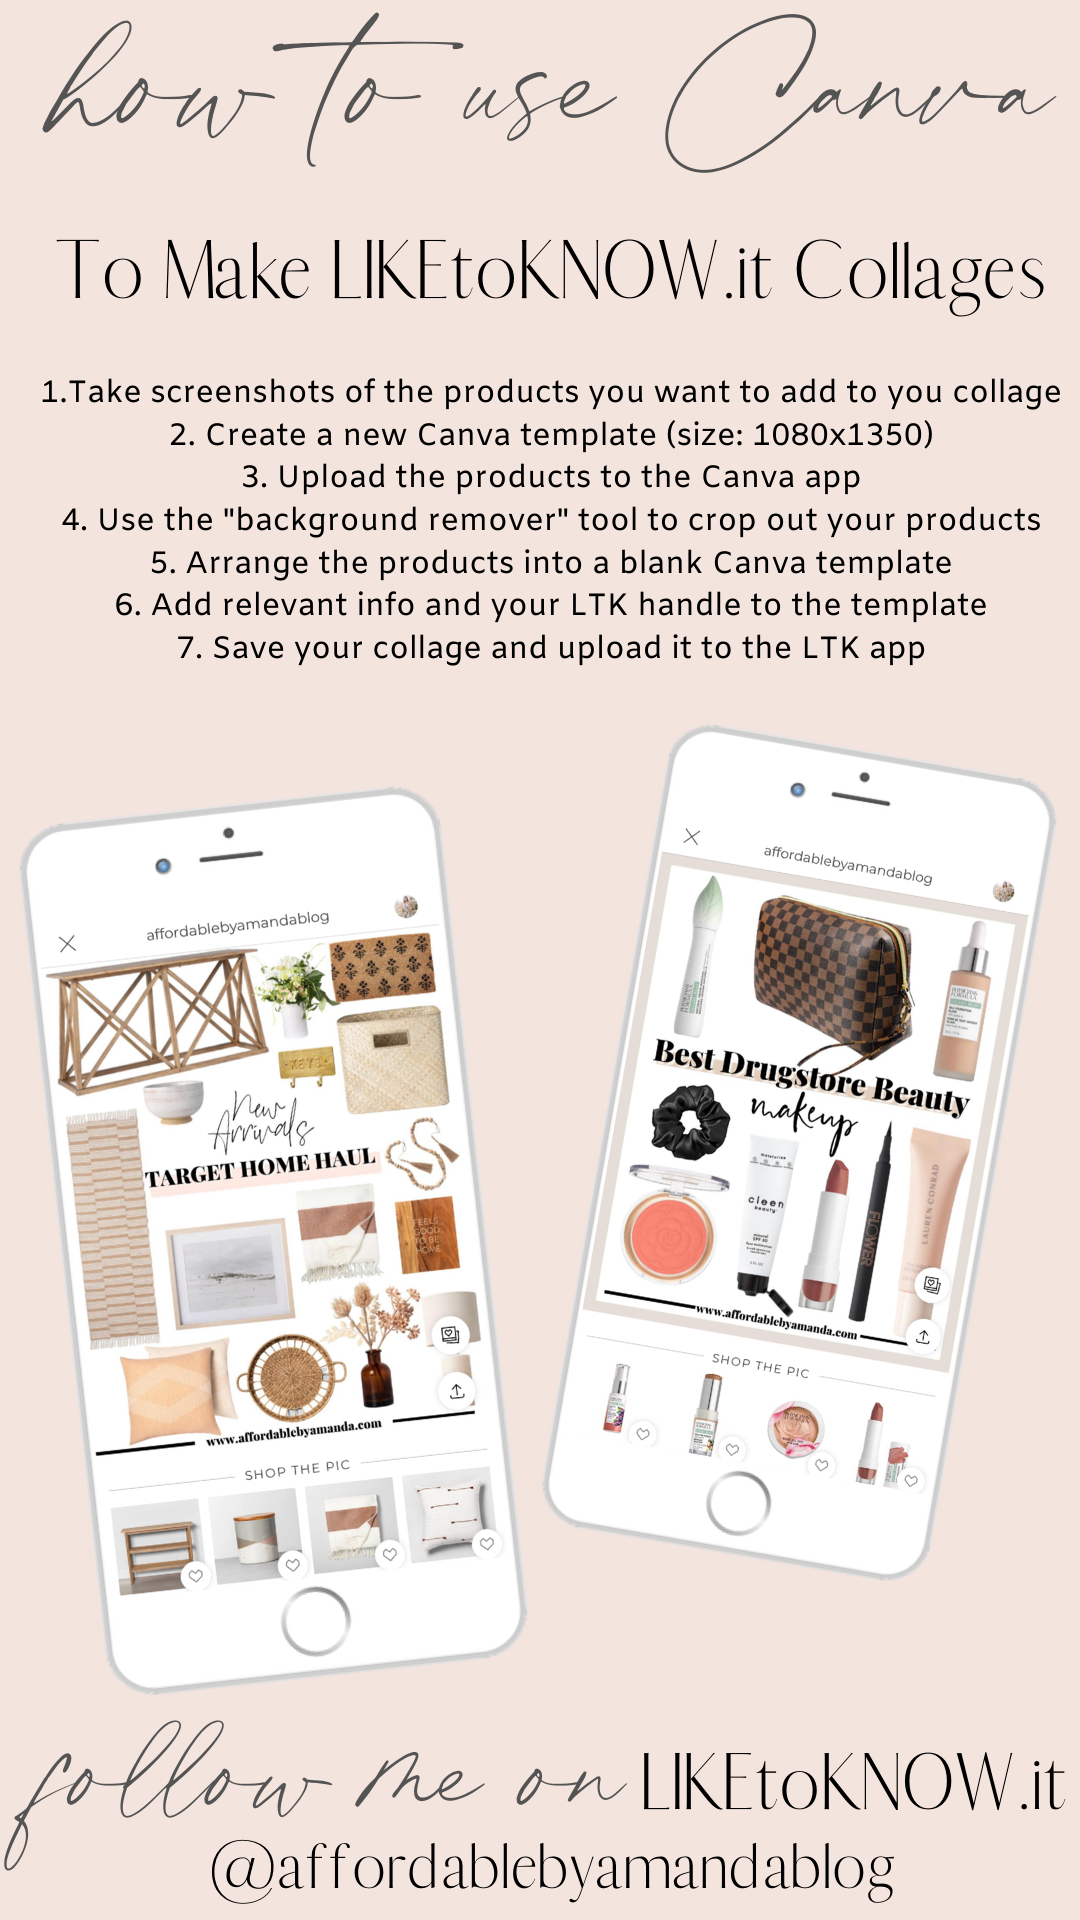 How to Make LIKEtoKNOW.it Collages as an Influencer - How to Use Canva to Make Product Collages - Affordable by Amanda